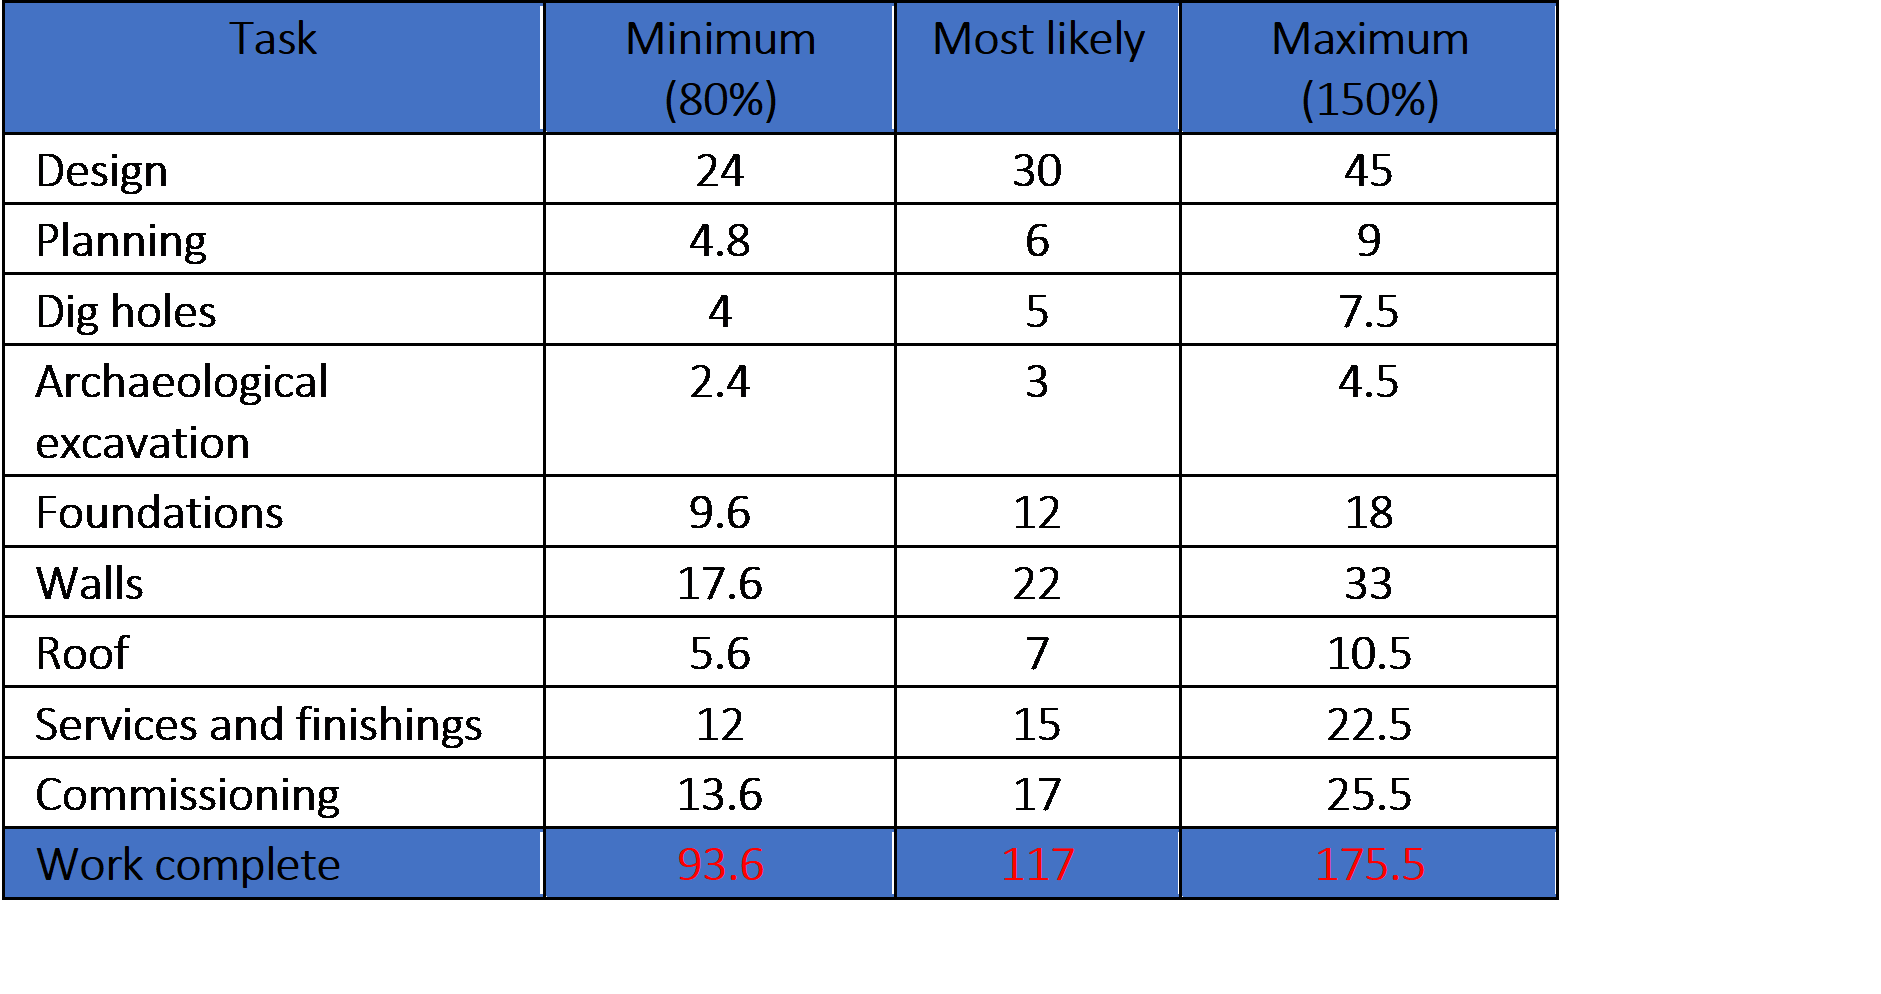 example project risk analysis model - table with uncertain task durations